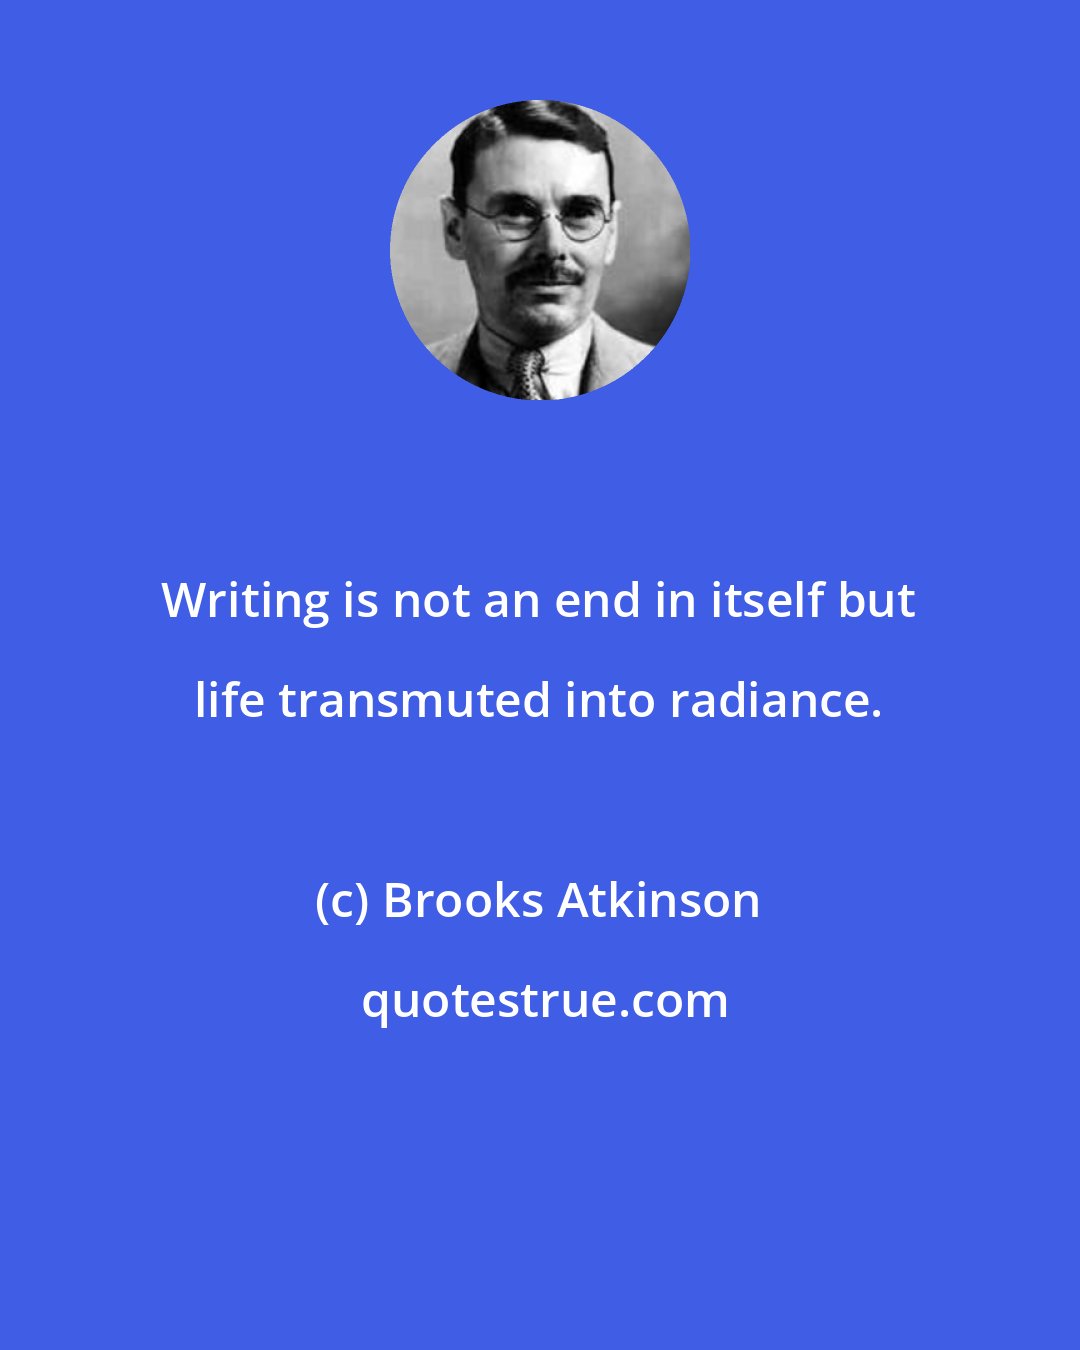 Brooks Atkinson: Writing is not an end in itself but life transmuted into radiance.